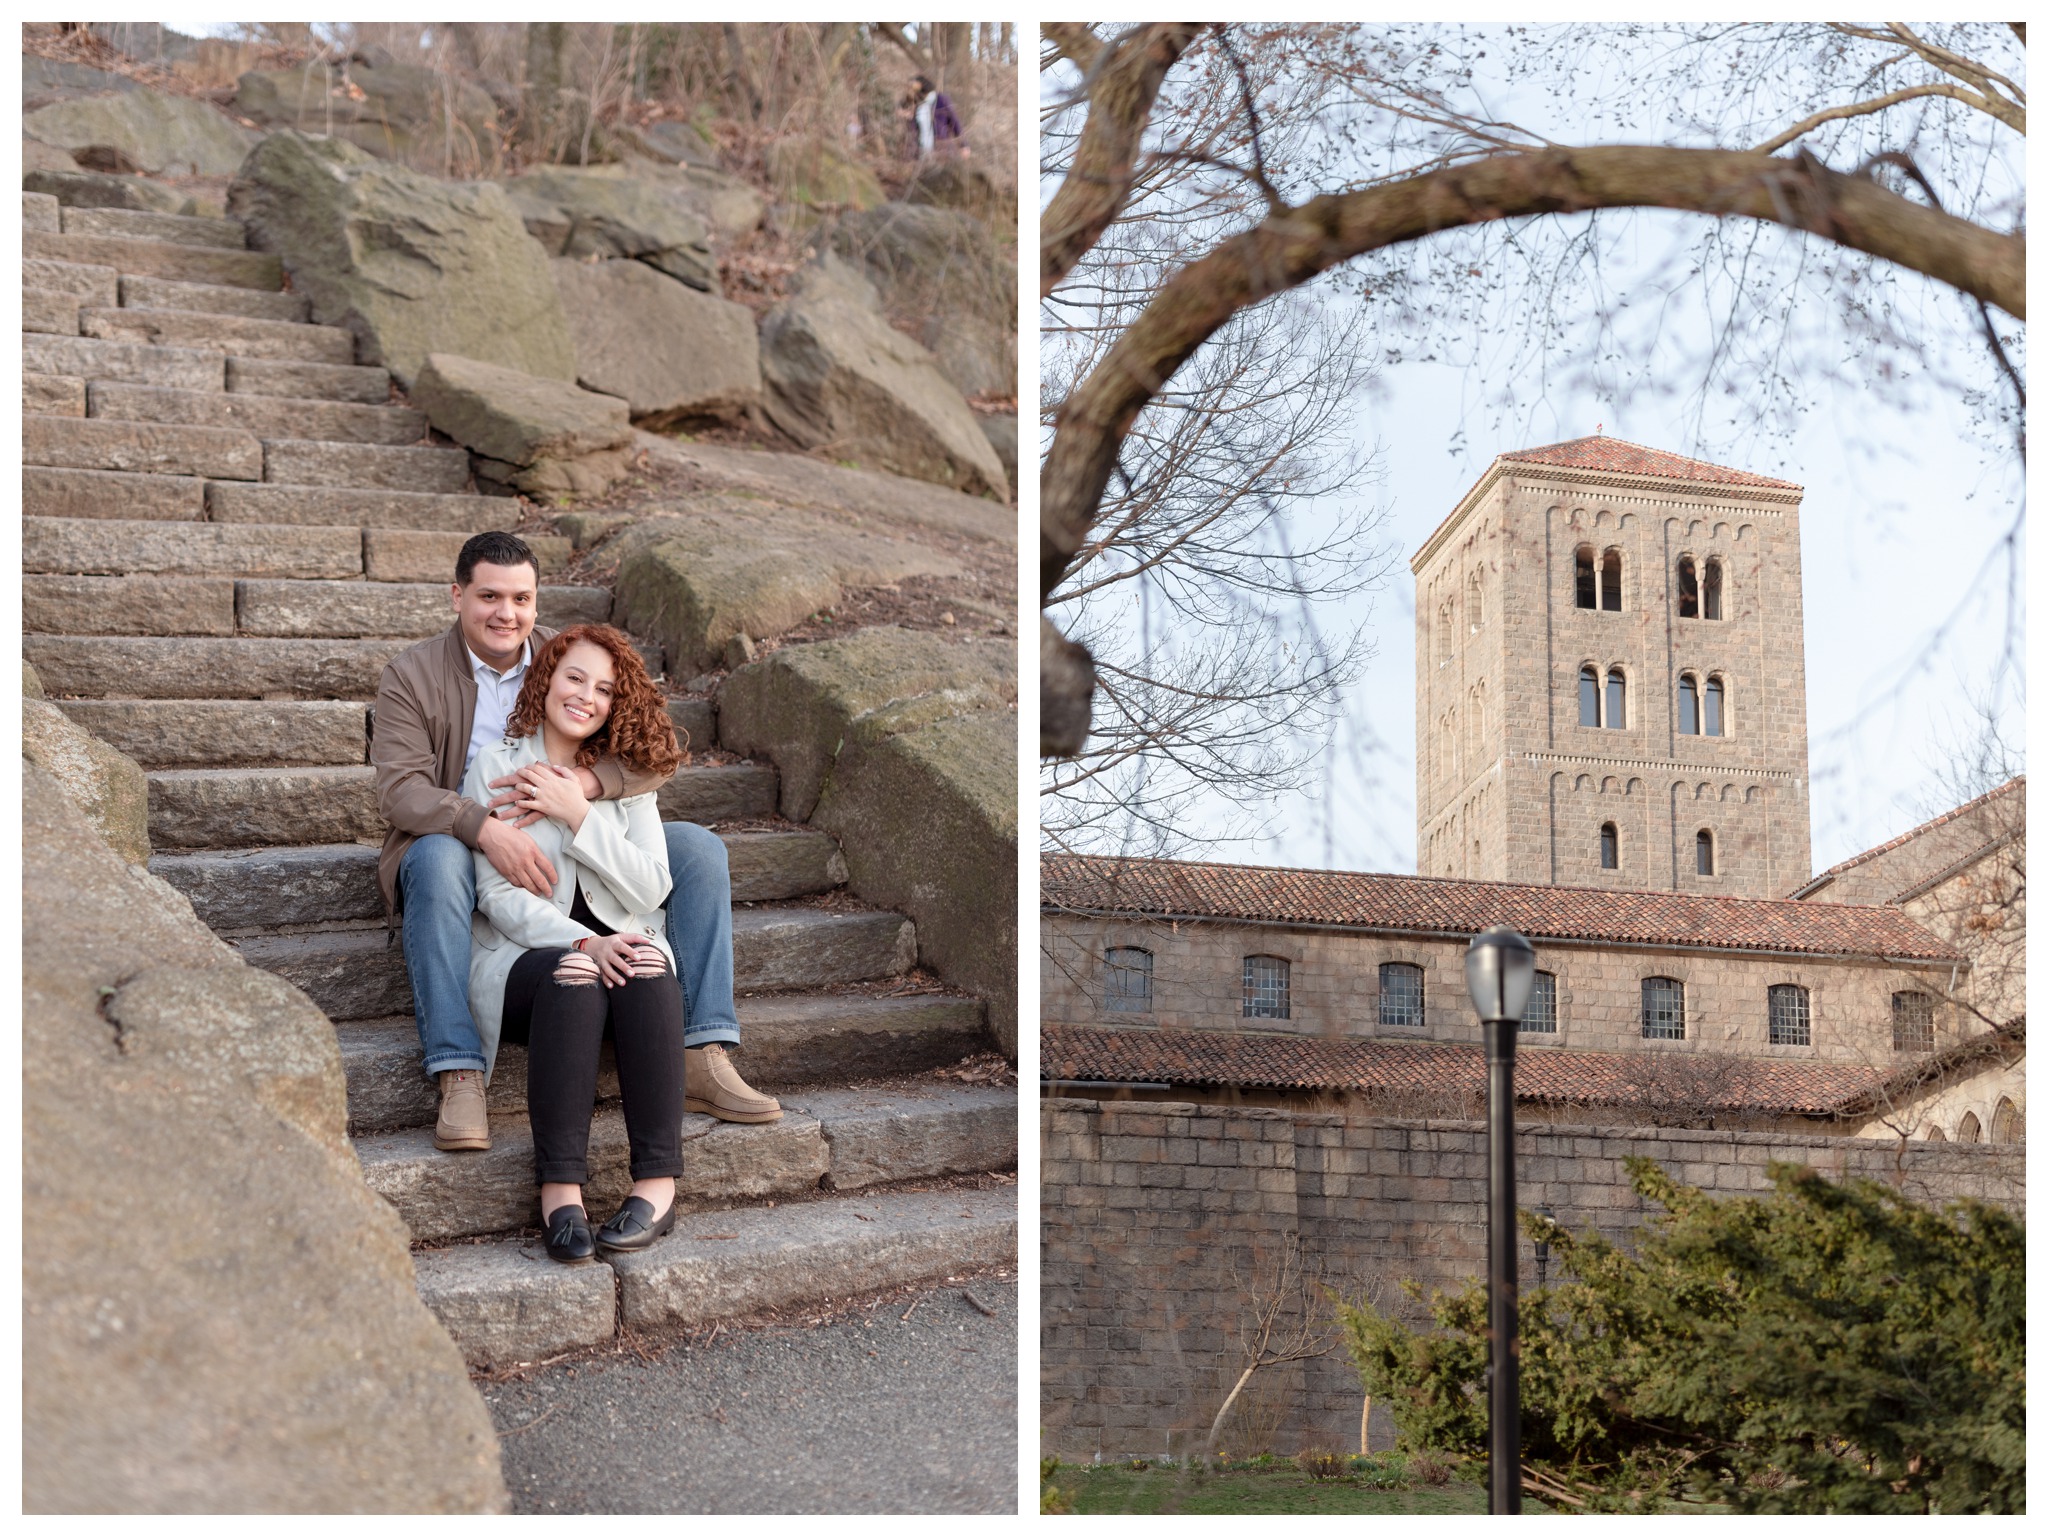 fort tryon park engagement session at the stone steps near cloisters building